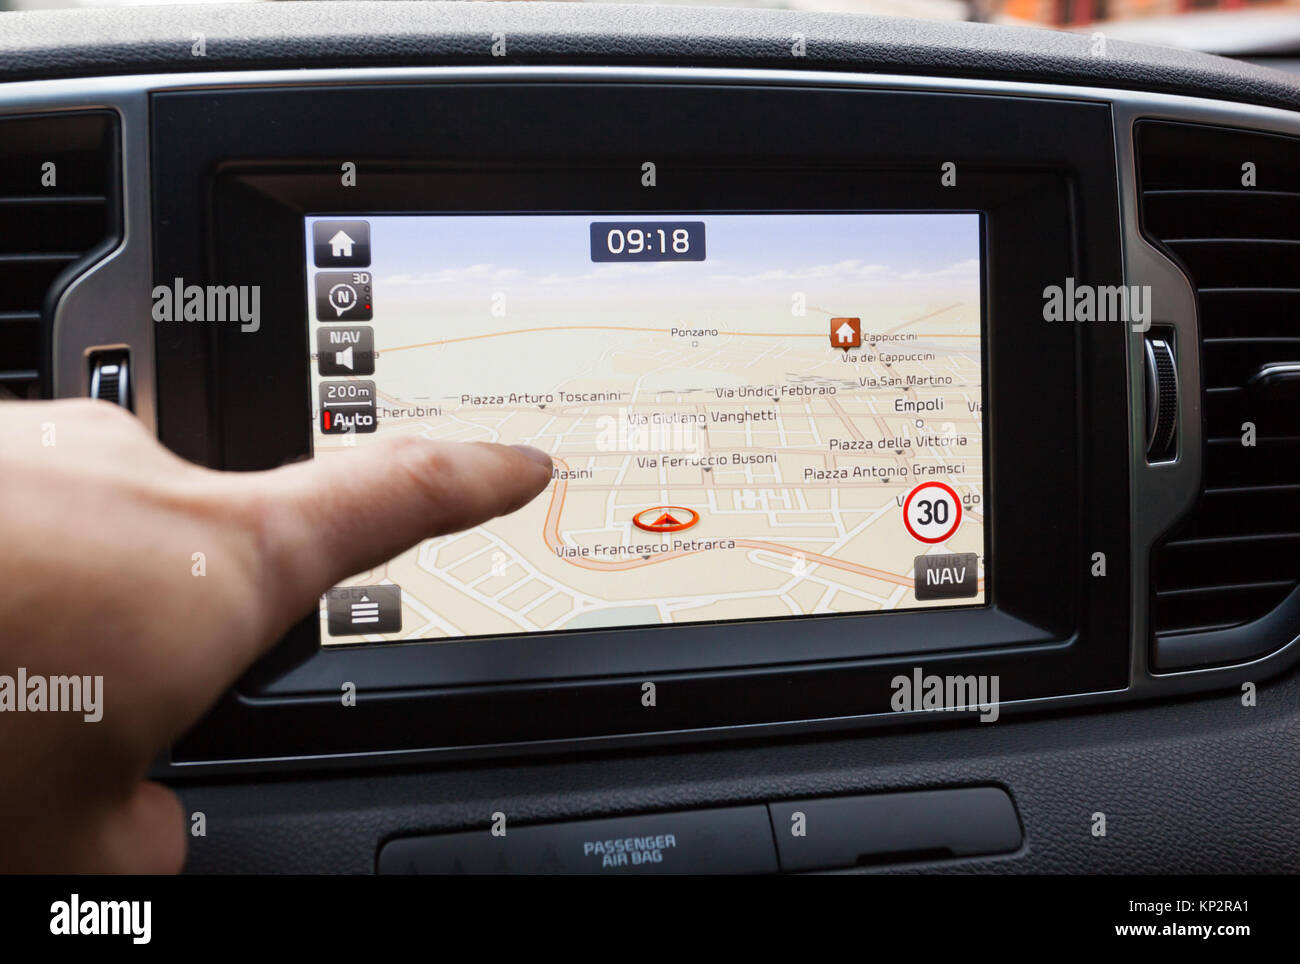 GPS navigation panel on dashboard inside a car. Finger pointing on destination point. Stock Photo